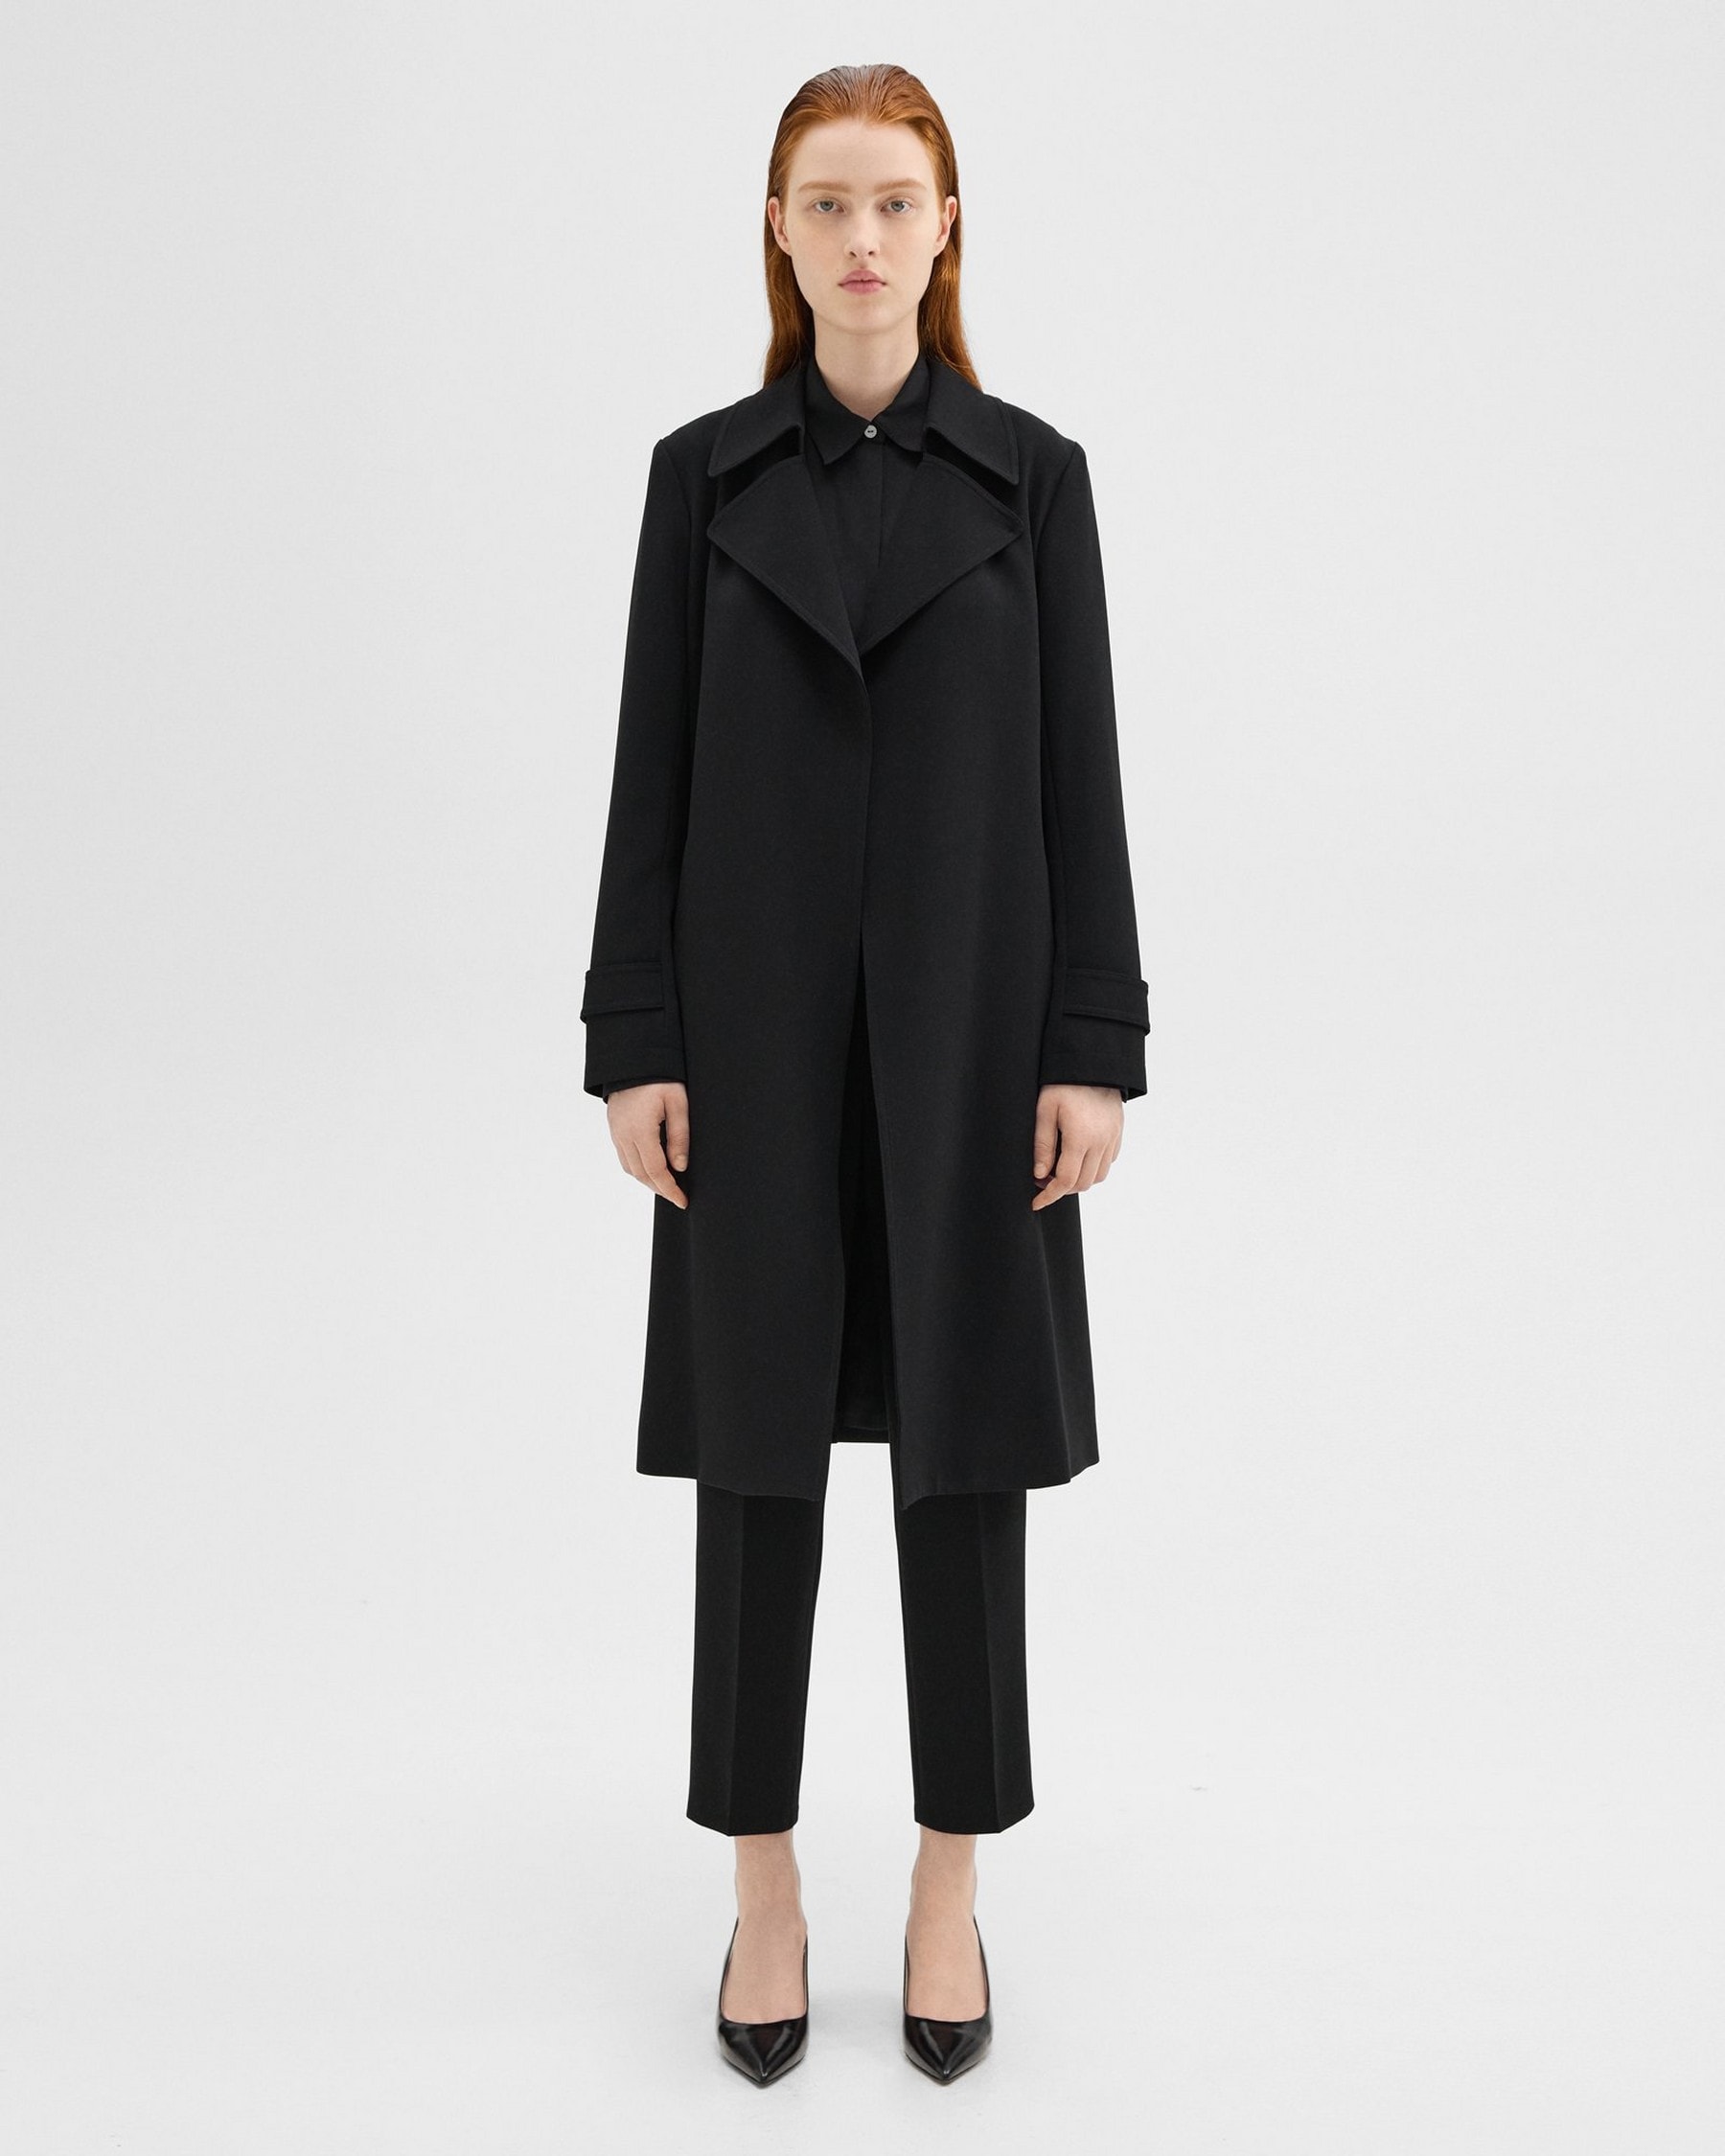 Black trench coat from Theory